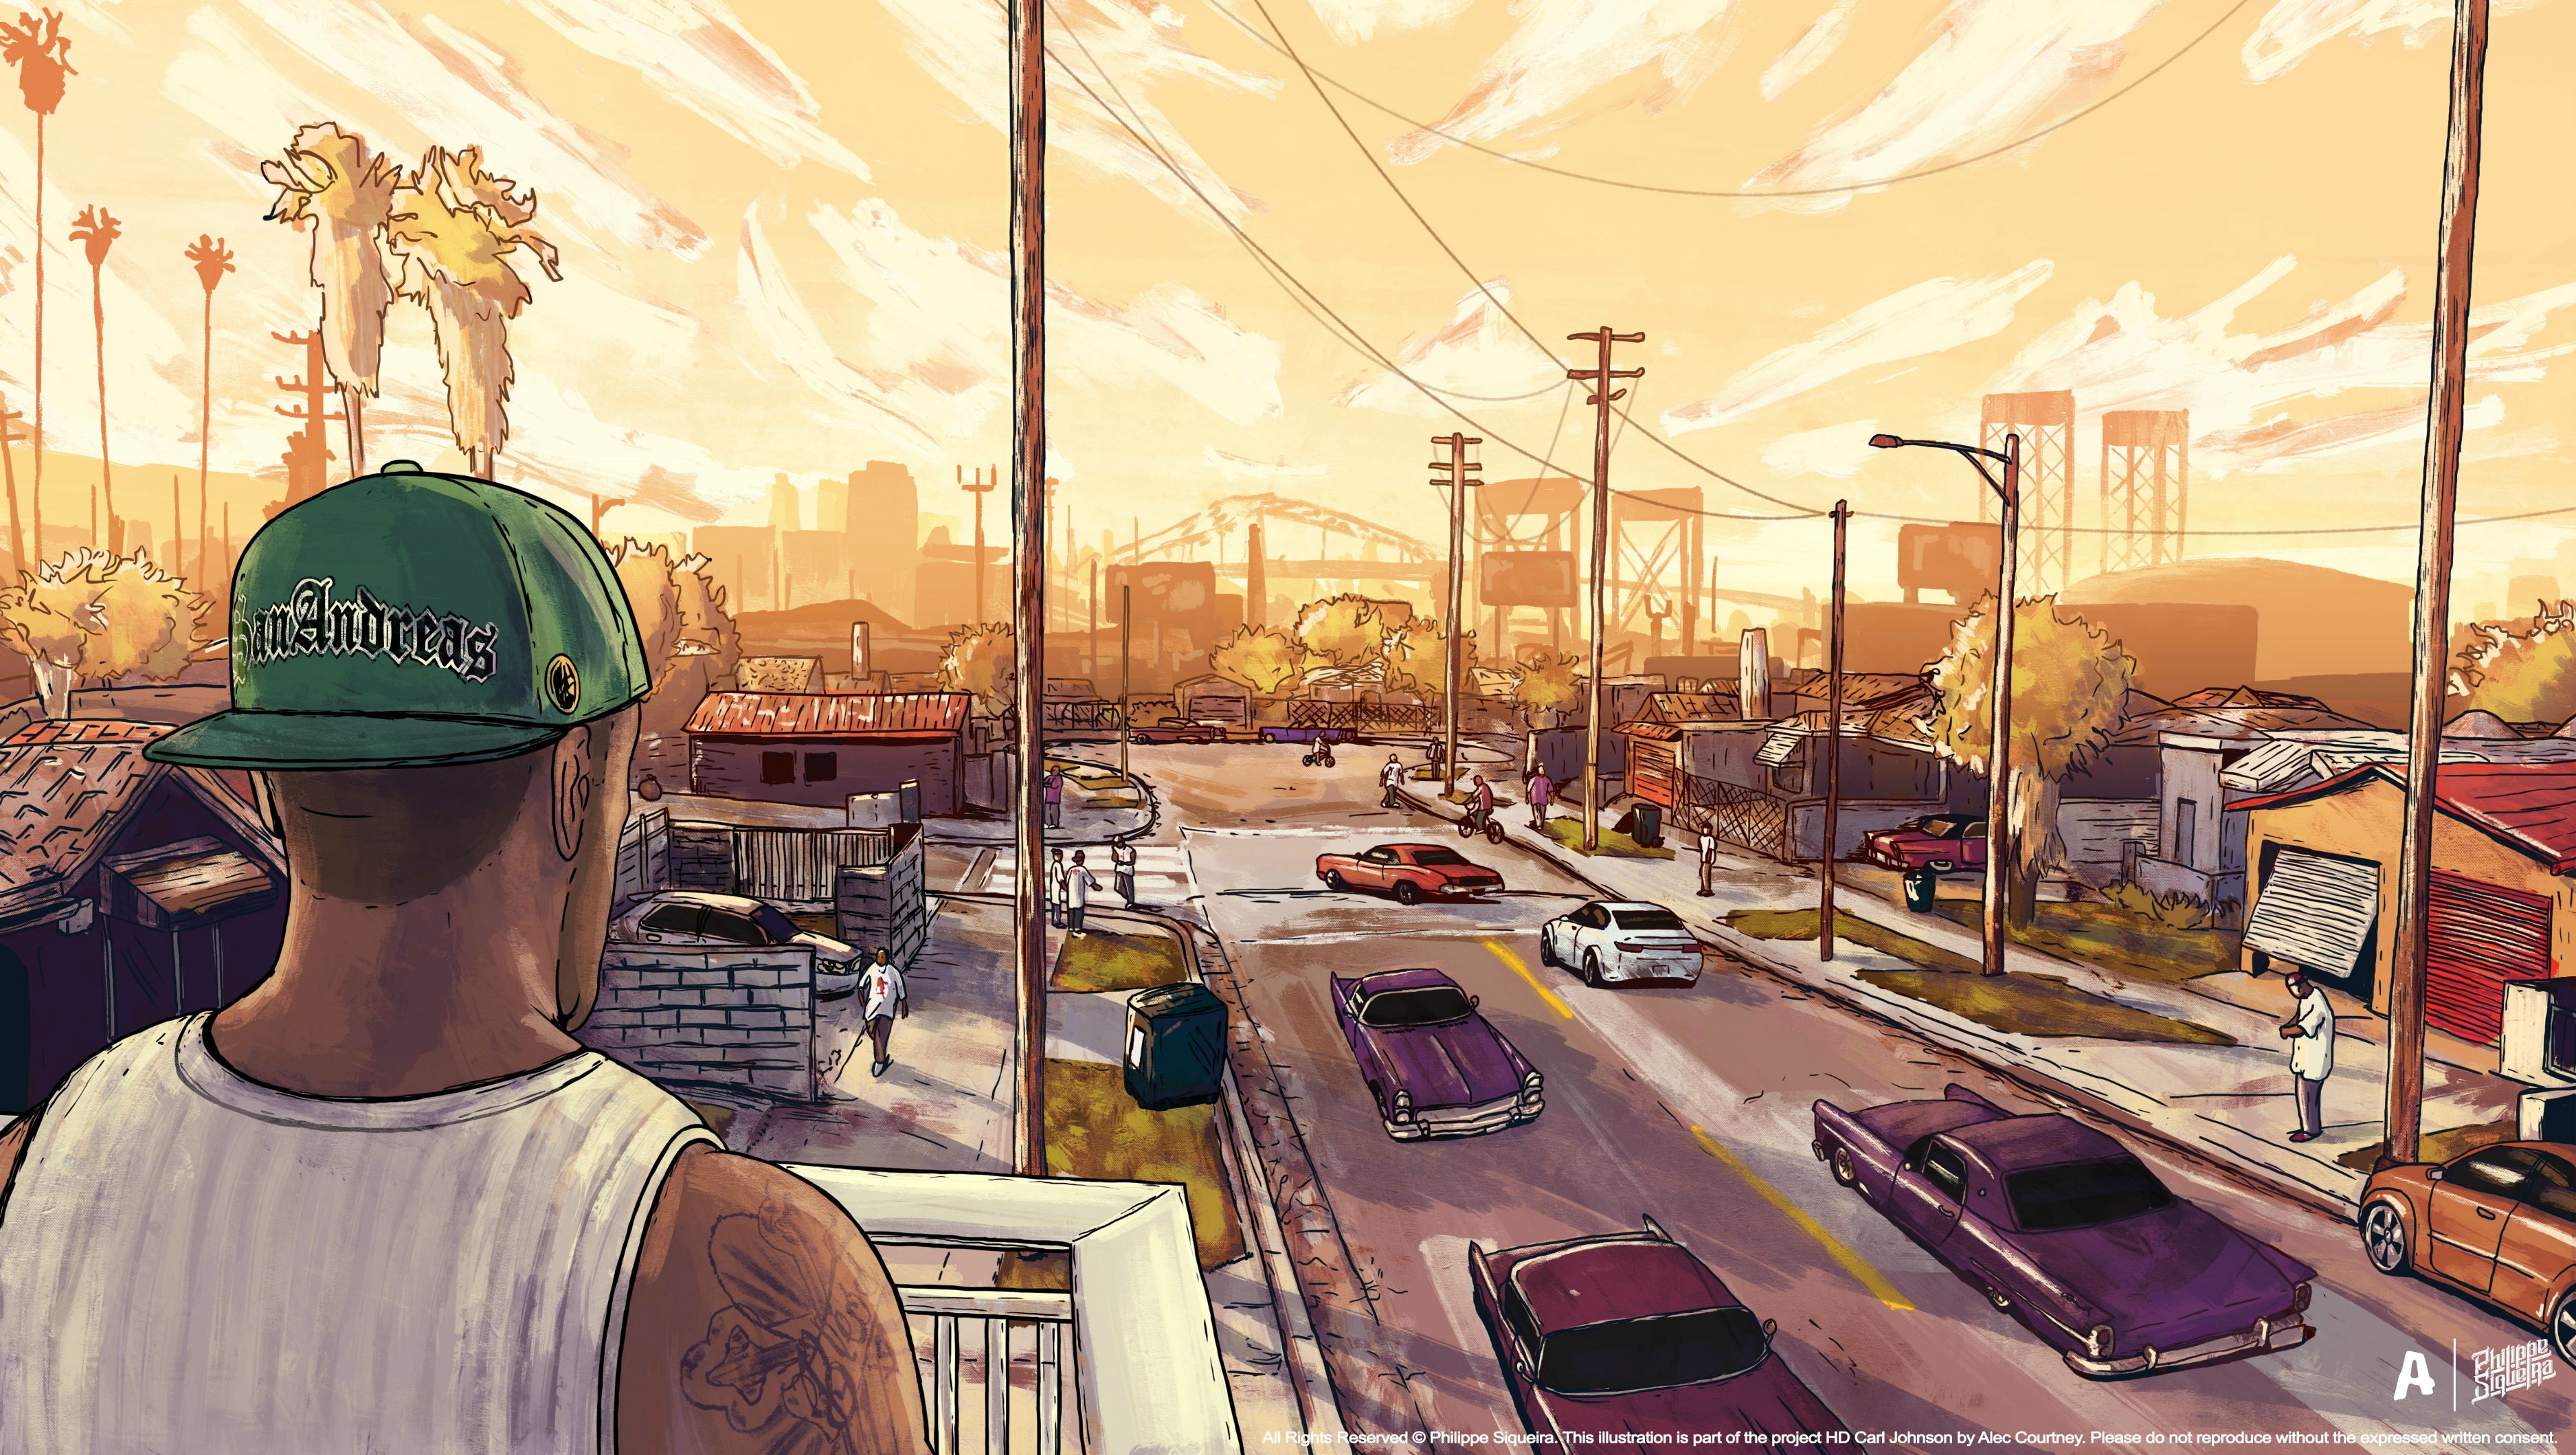 Gta San Andreas Artwork, HD Games, 4k Wallpaper, Image, Background, Photo and Picture